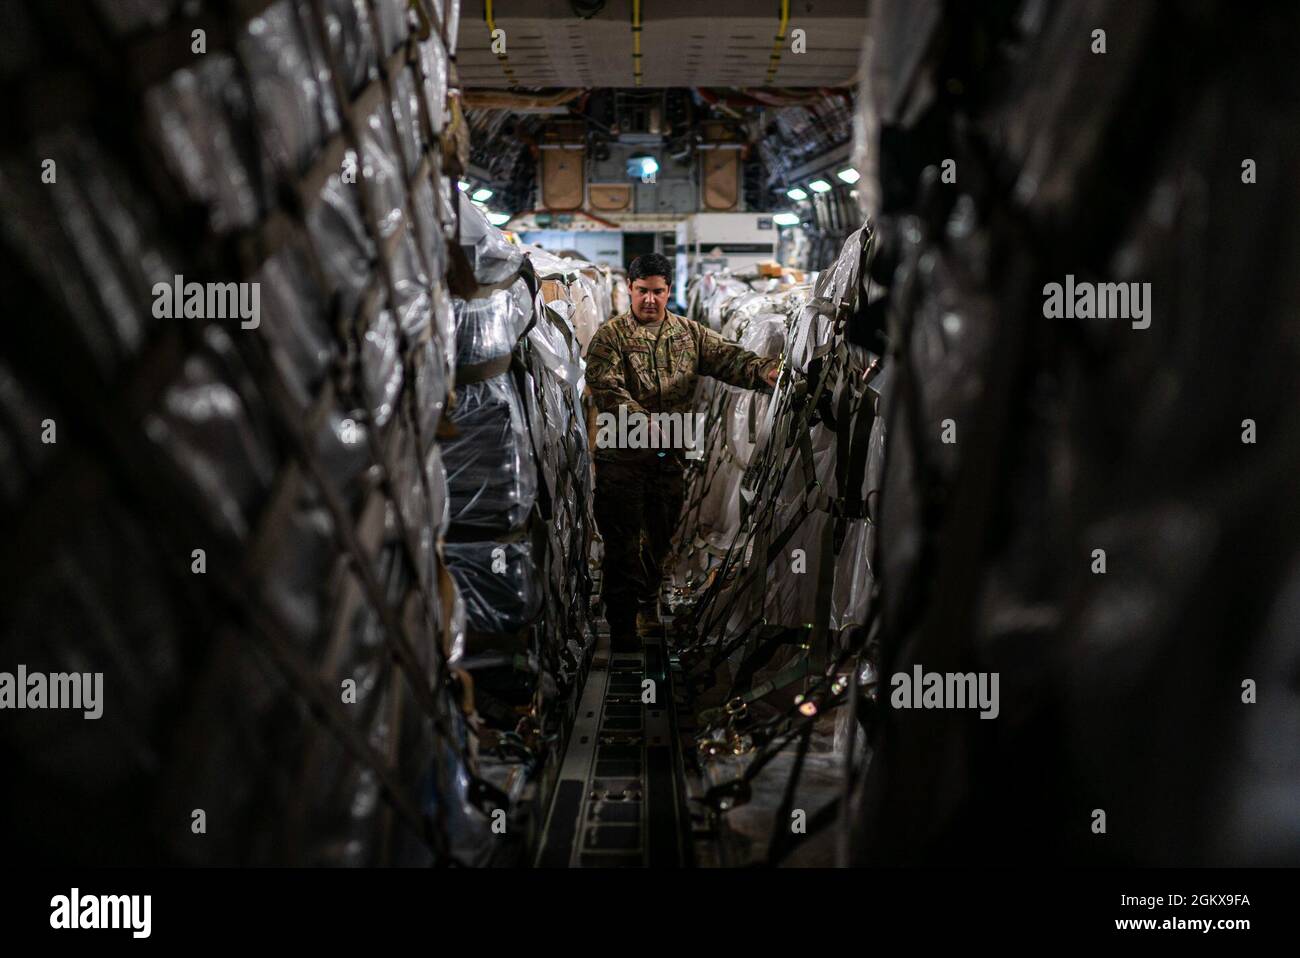 Staff Sgt. Dwayne Baldwin, 701st Airlift Squadron loadmaster, inspects cargo before departing to Johan Adolf Pengel International Airport, Suriname from Joint Base Charleston, South Carolina, July 16, 2021. The portable field hospital, valued at $745,000, was donated by U.S. Southern Command Stock Photo